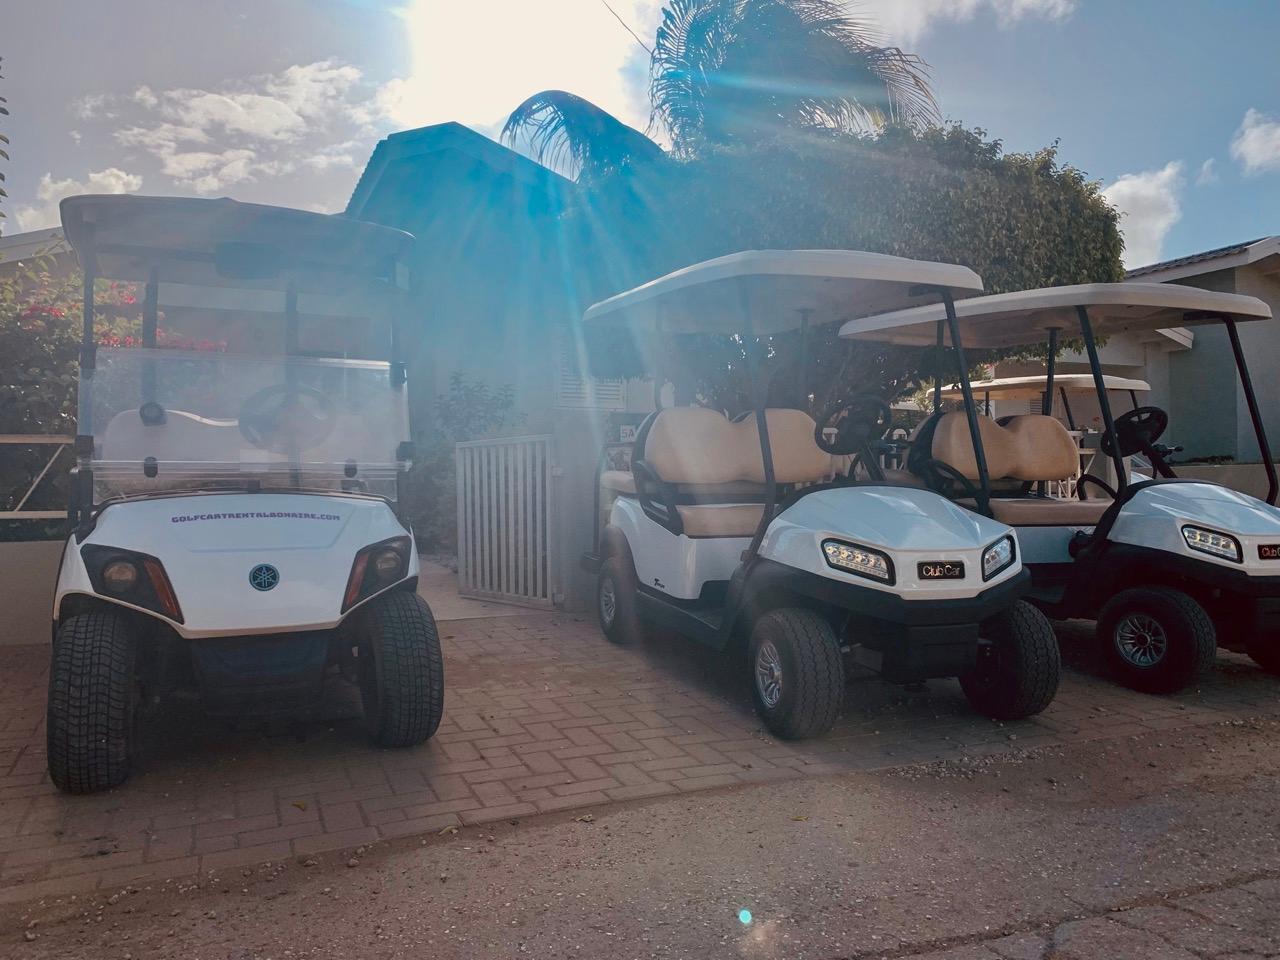 Golfcart Rental close to the cruise port in bonaire.